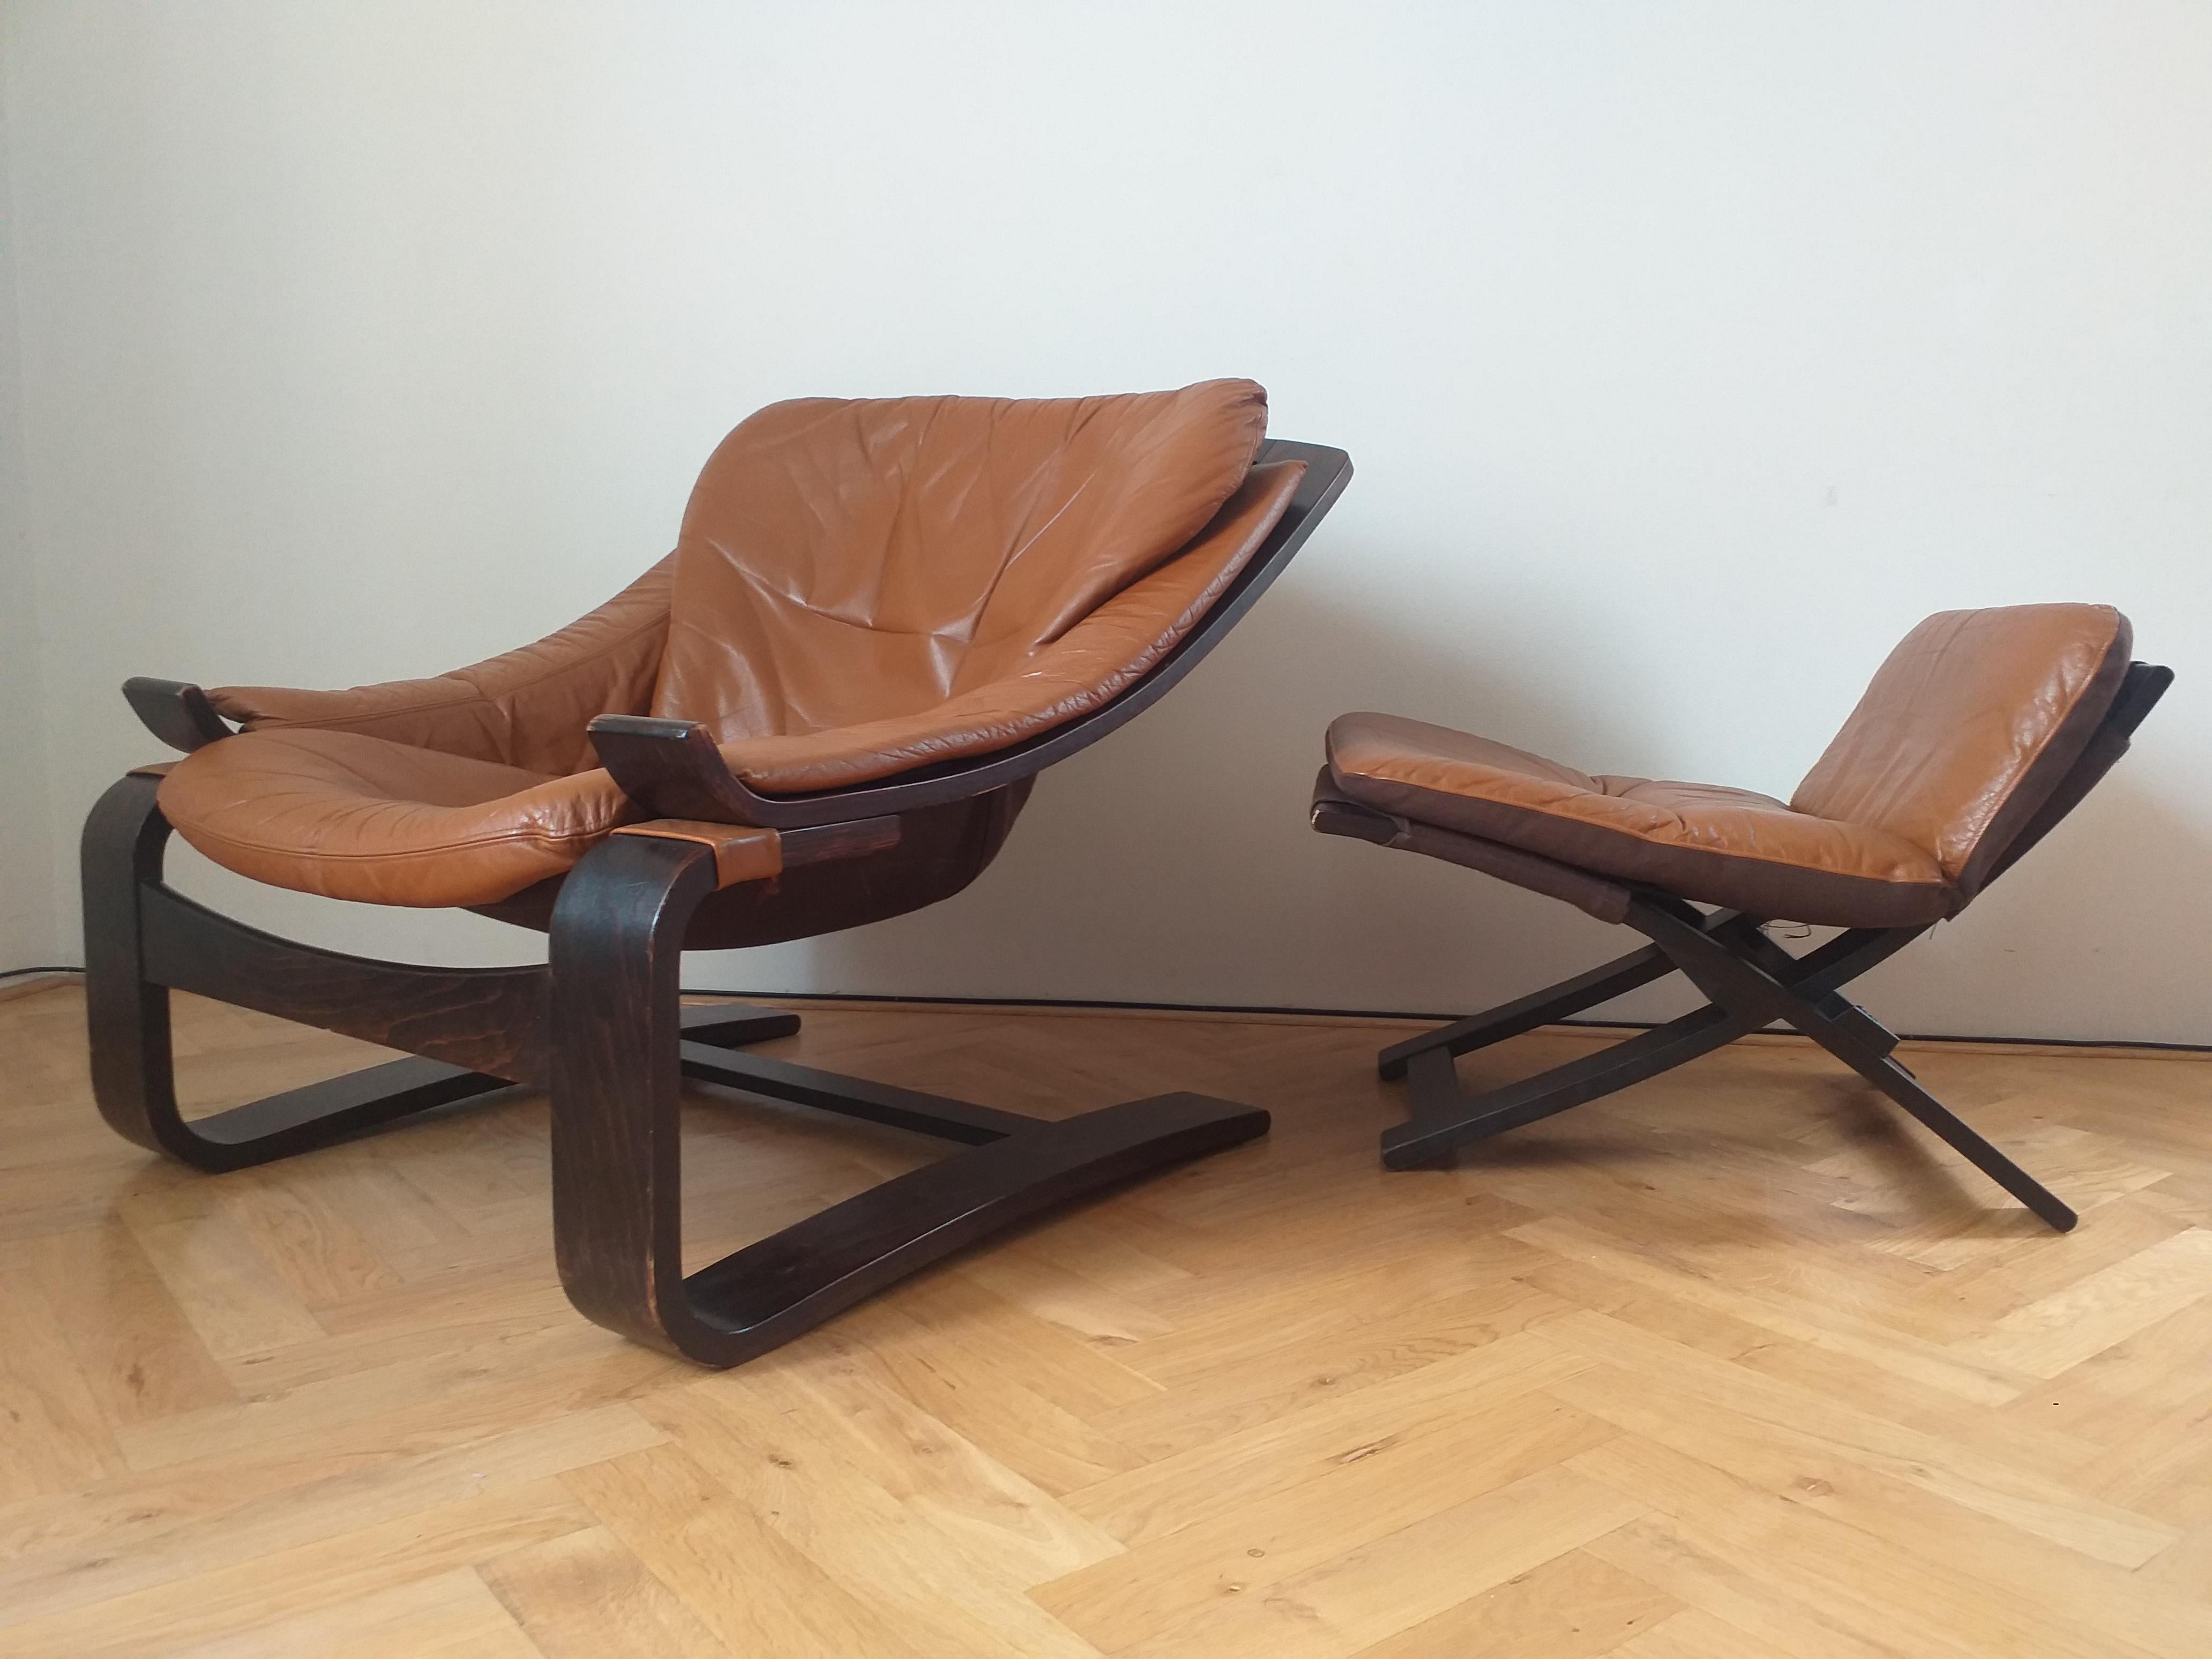 Late 20th Century Midcentury Lounge Chair Kroken with Ottoman, Ake Fribytter, Nelo, Sweden, 1970s For Sale